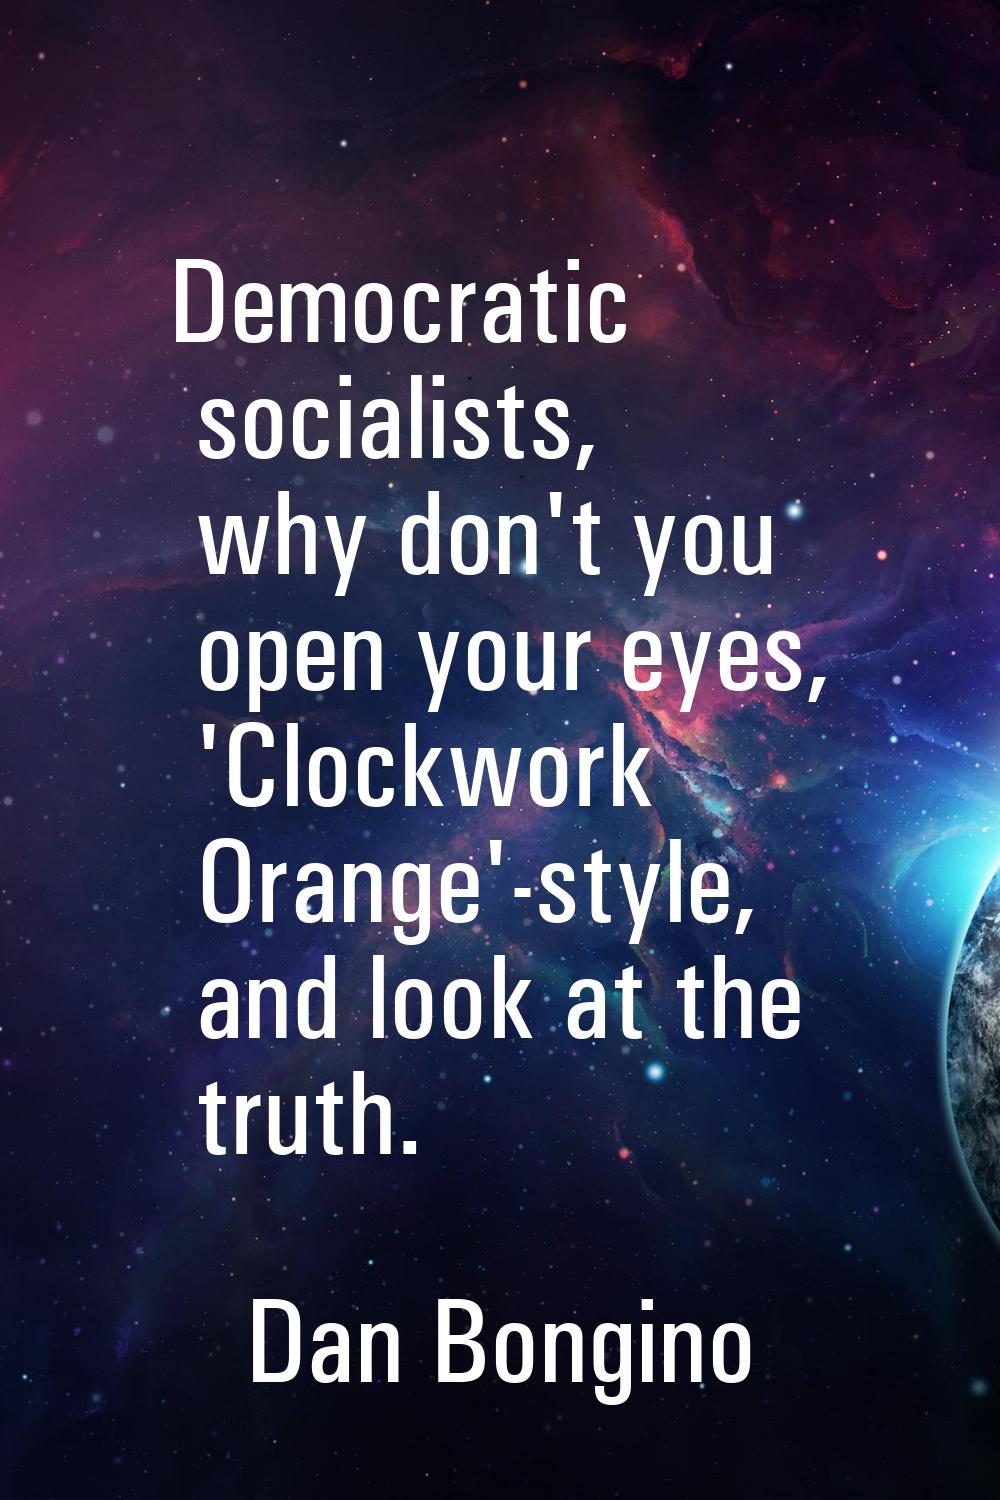 Democratic socialists, why don't you open your eyes, 'Clockwork Orange'-style, and look at the trut